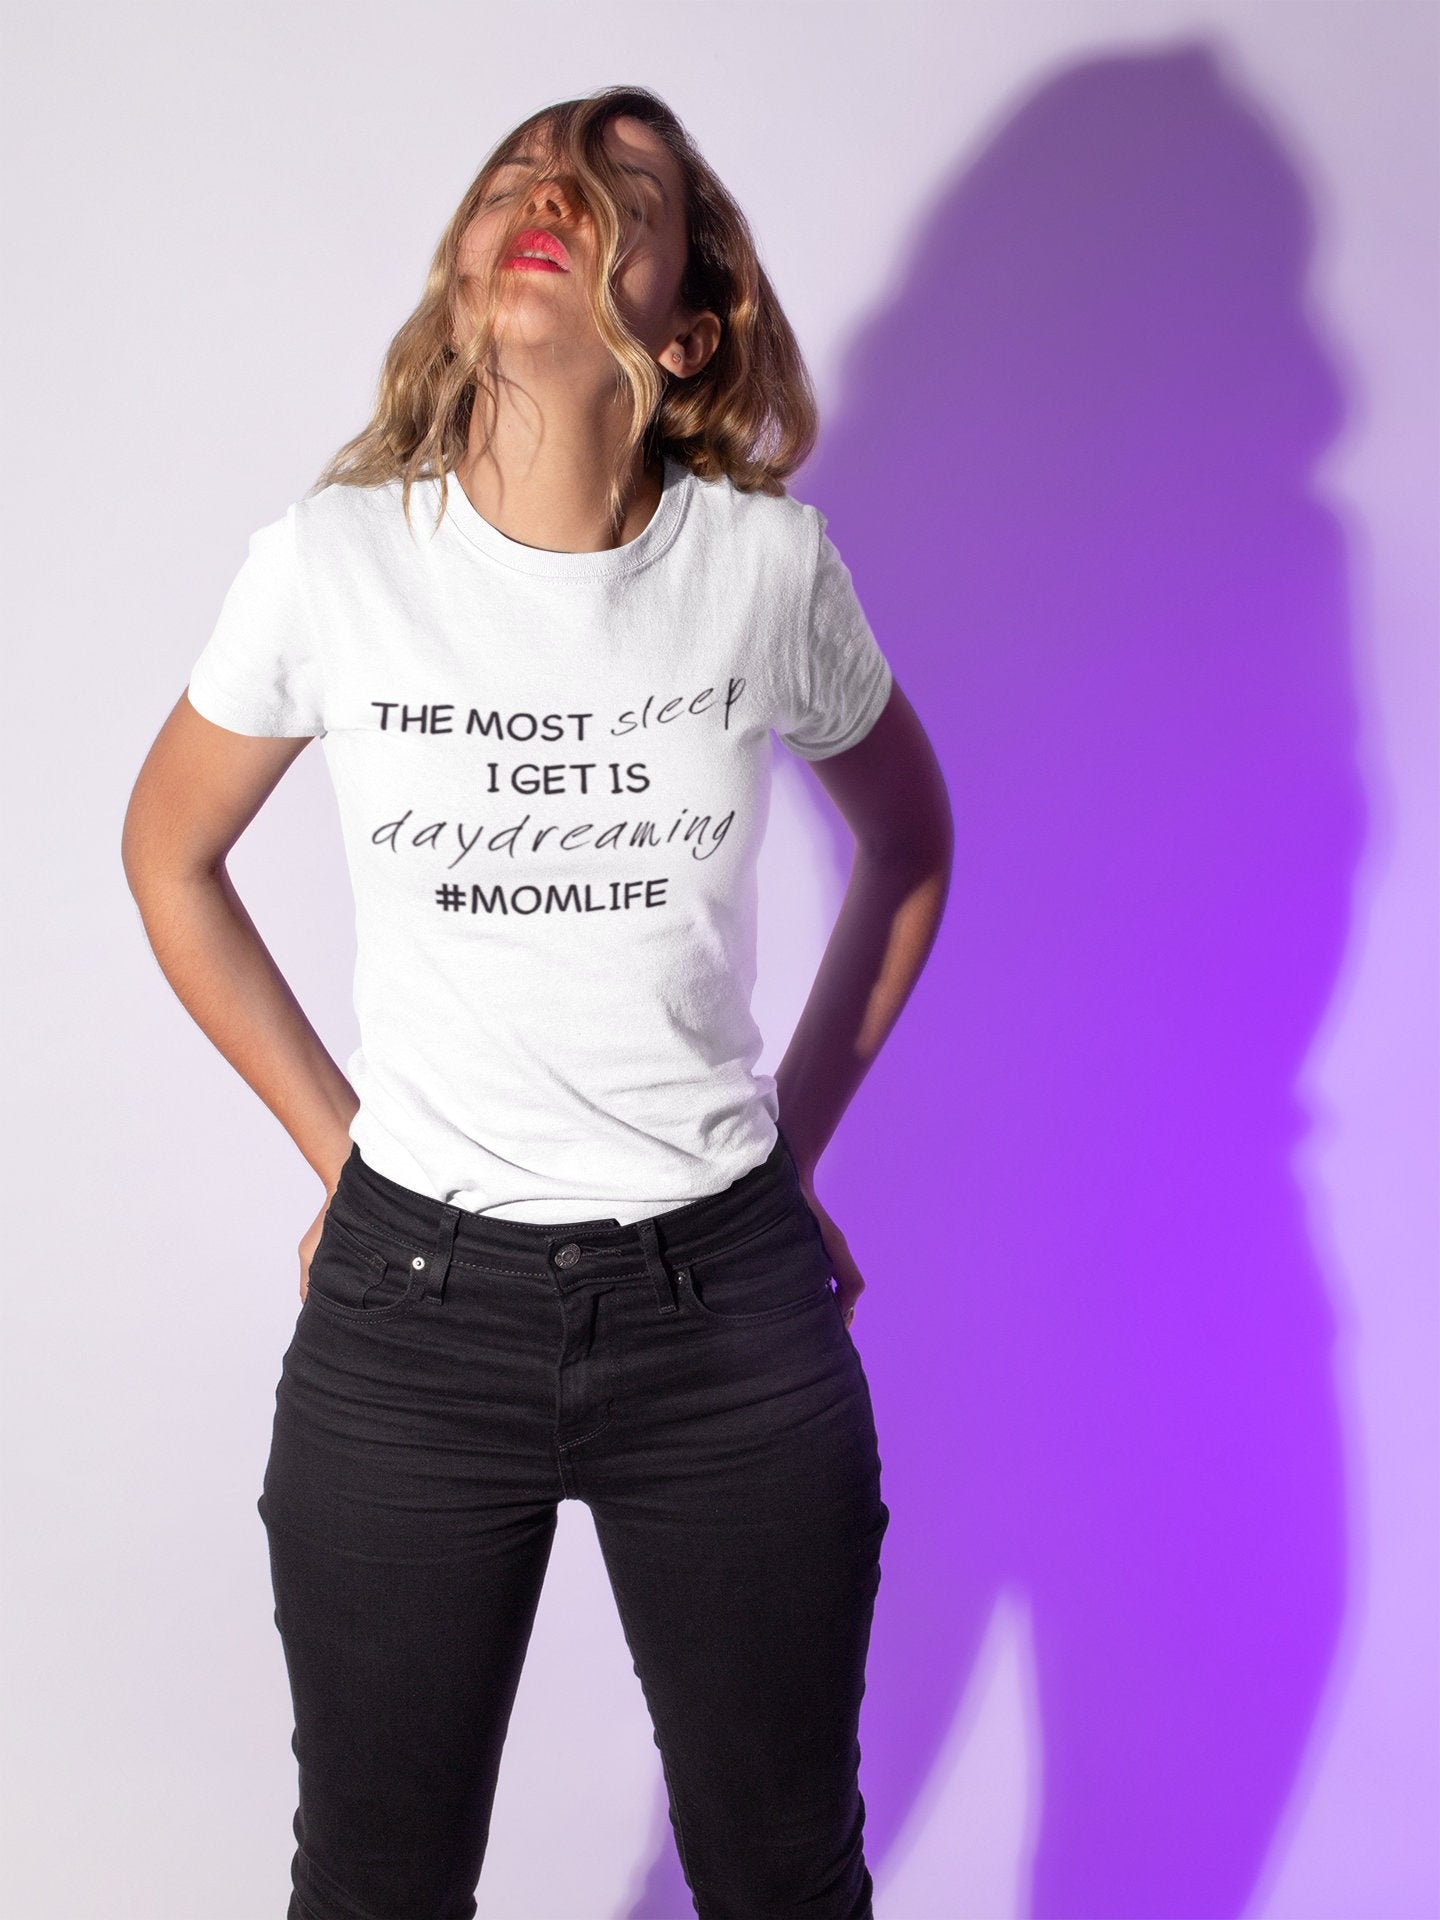 The most sleep I get is daydreaming shirt mothers day gift funny mom shirt mom life tee mom life t-shirt mom gift mom life tshirt